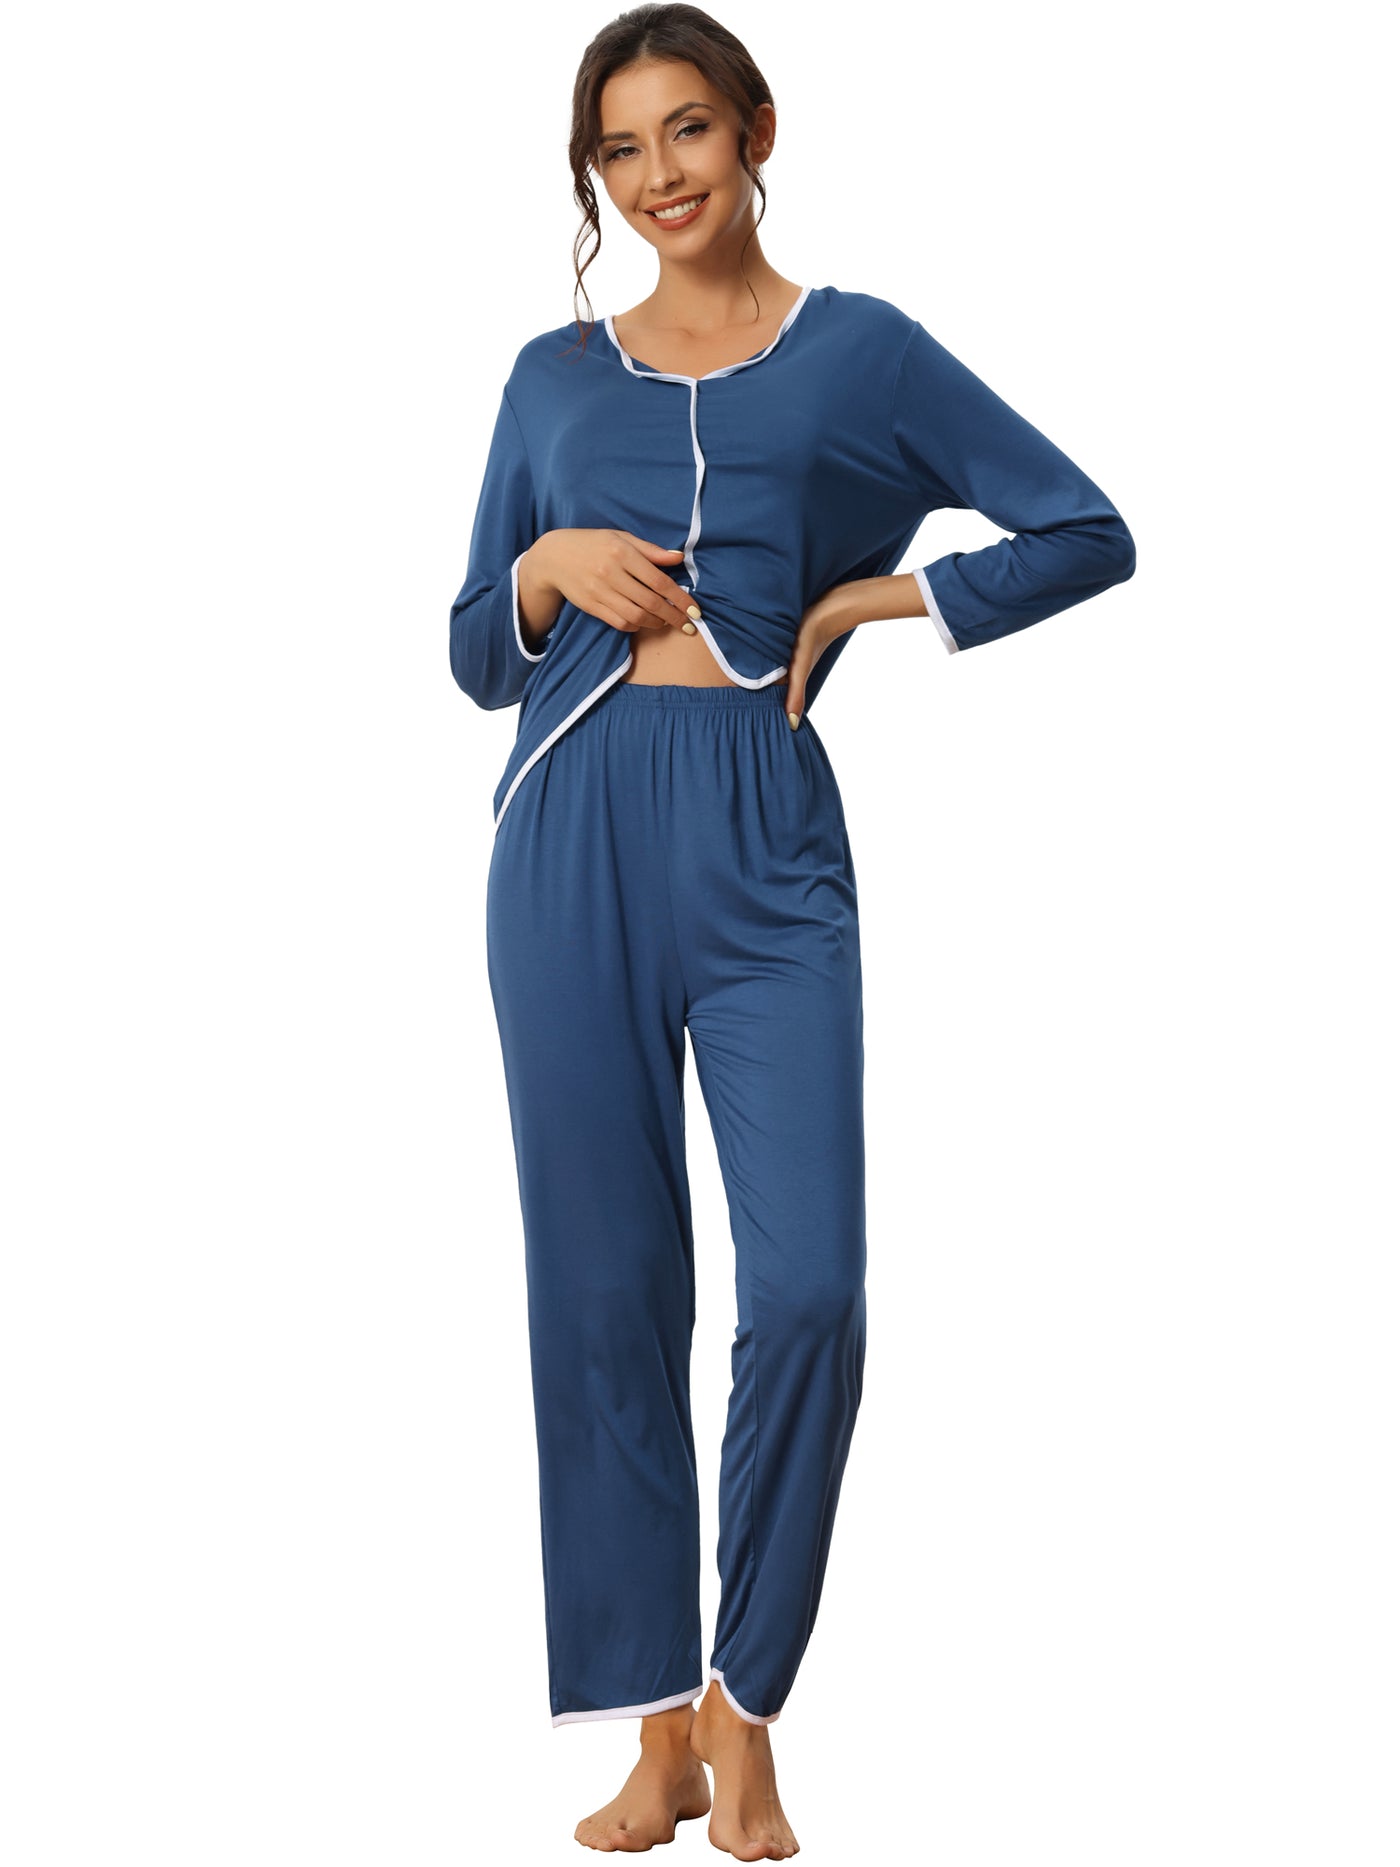 Bublédon Womens Sleepwear Pajamas Long Sleeve Pullover Tops with Pants Lounge Sets